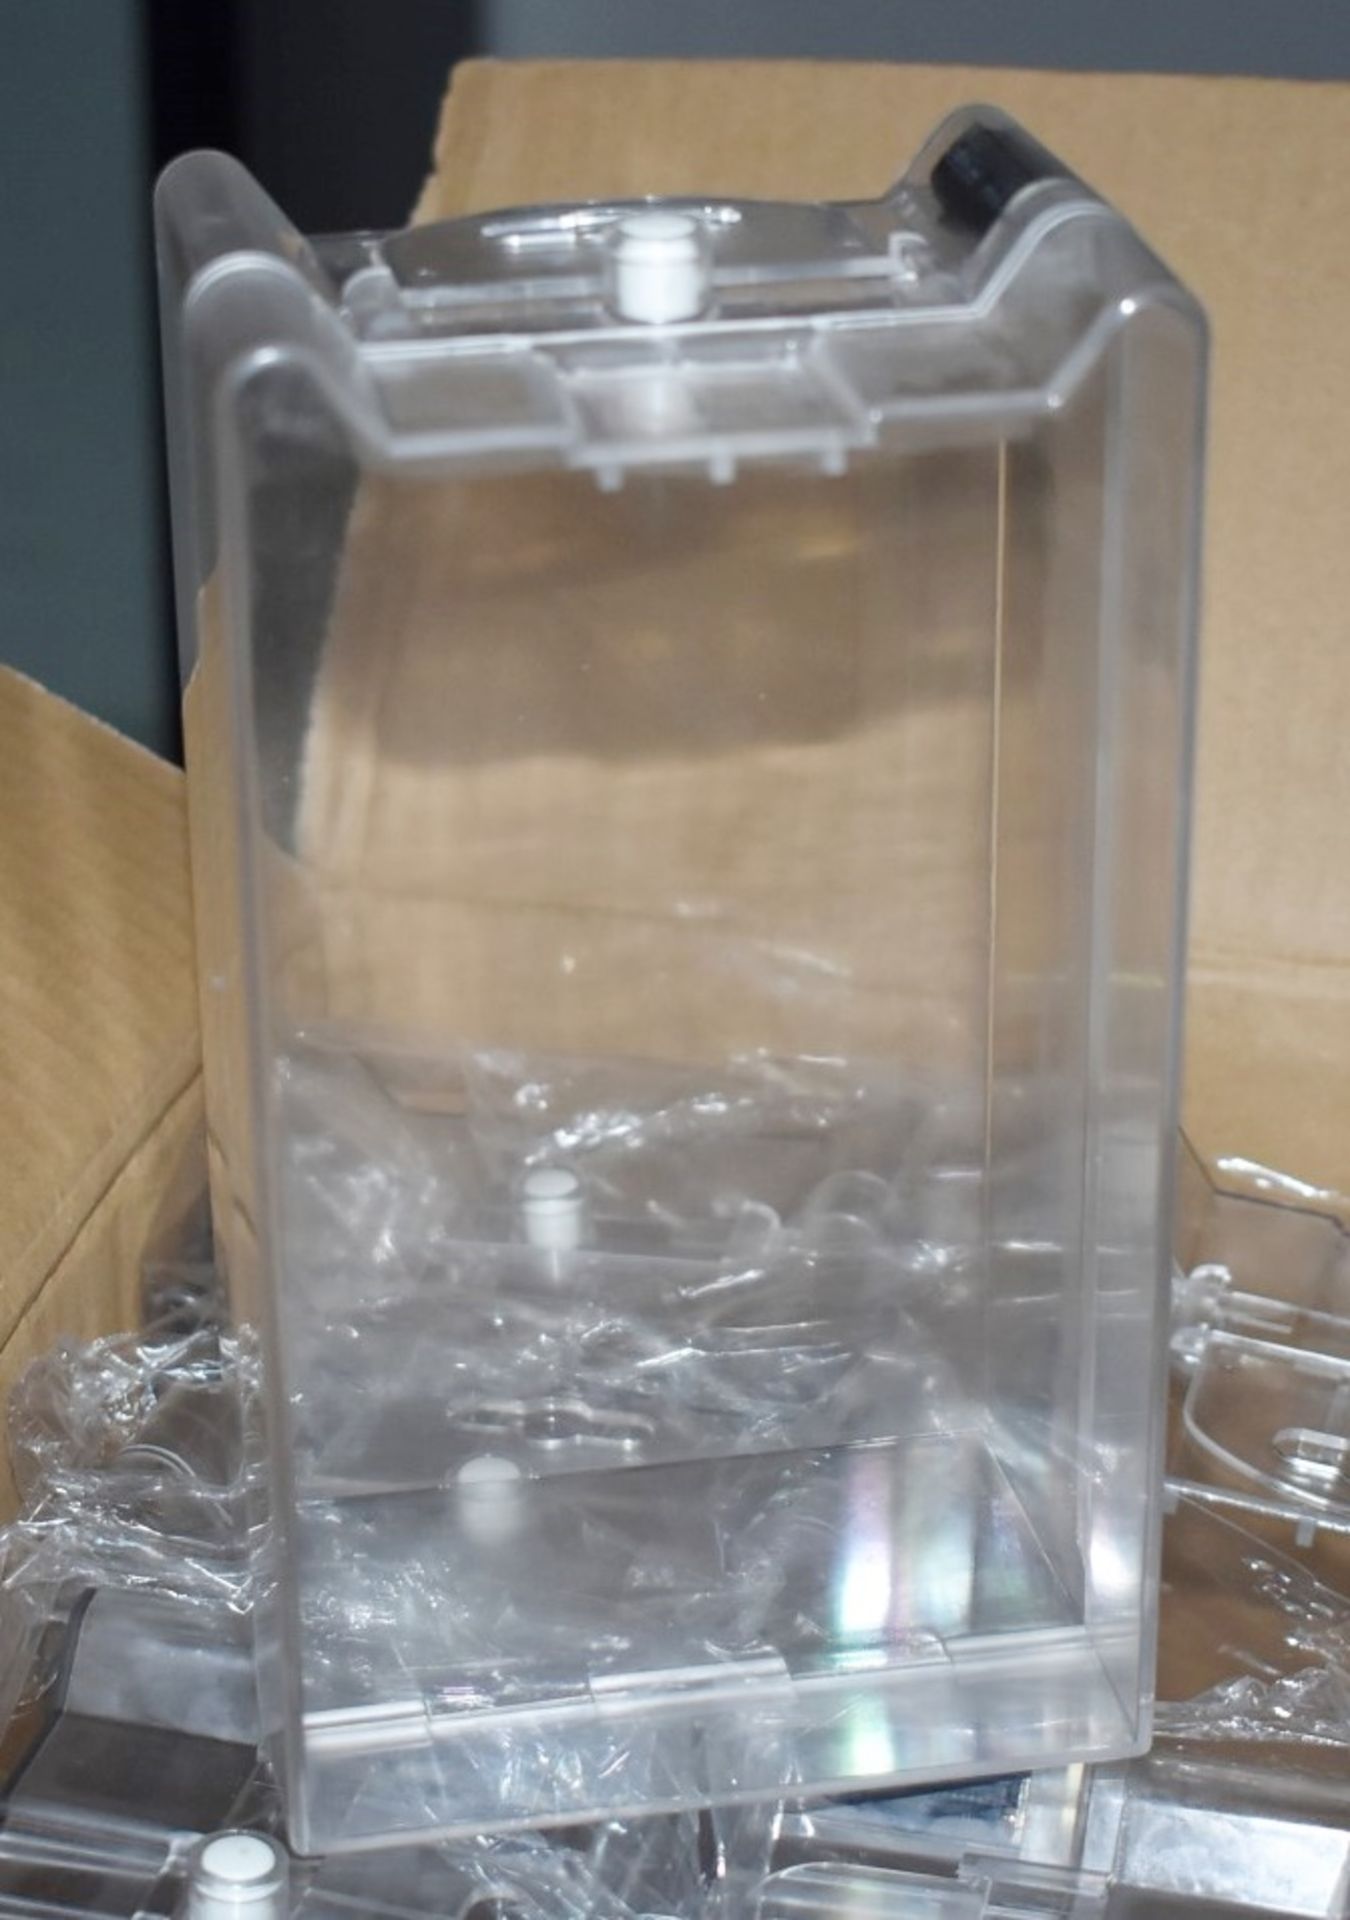 40 x Catalyst Clear Acrylic Retail Security Safer Cases With RF Tags and Hanging Tags - Brand New - Image 6 of 9